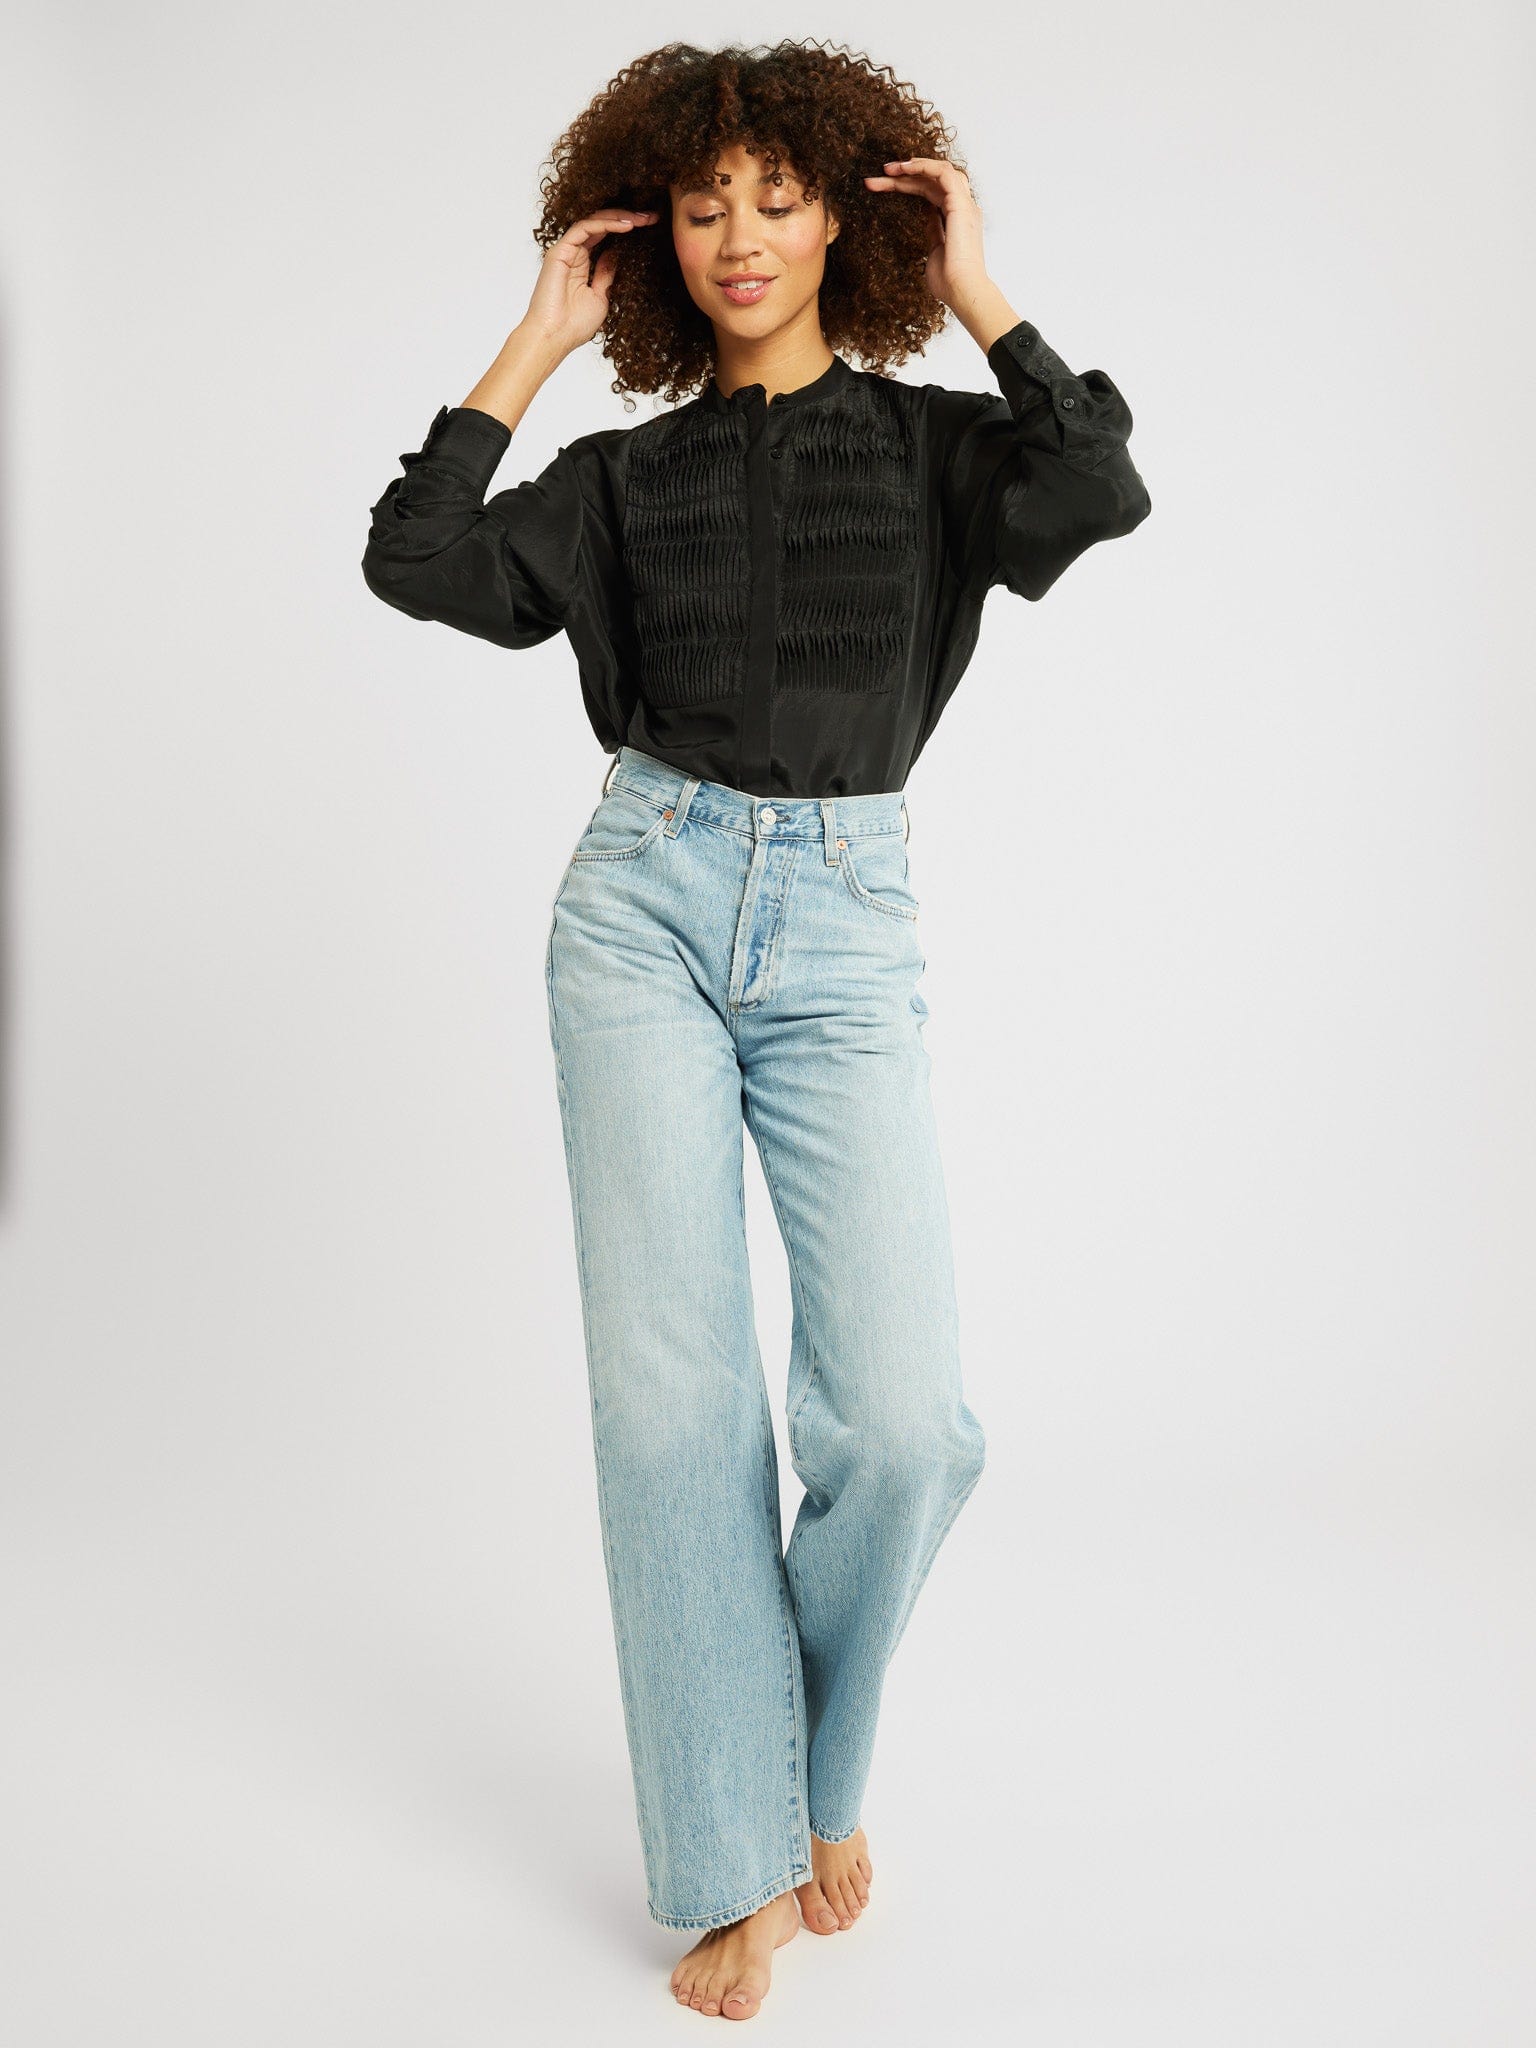 MILLE Clothing Keaton Top in Black Washed Silk